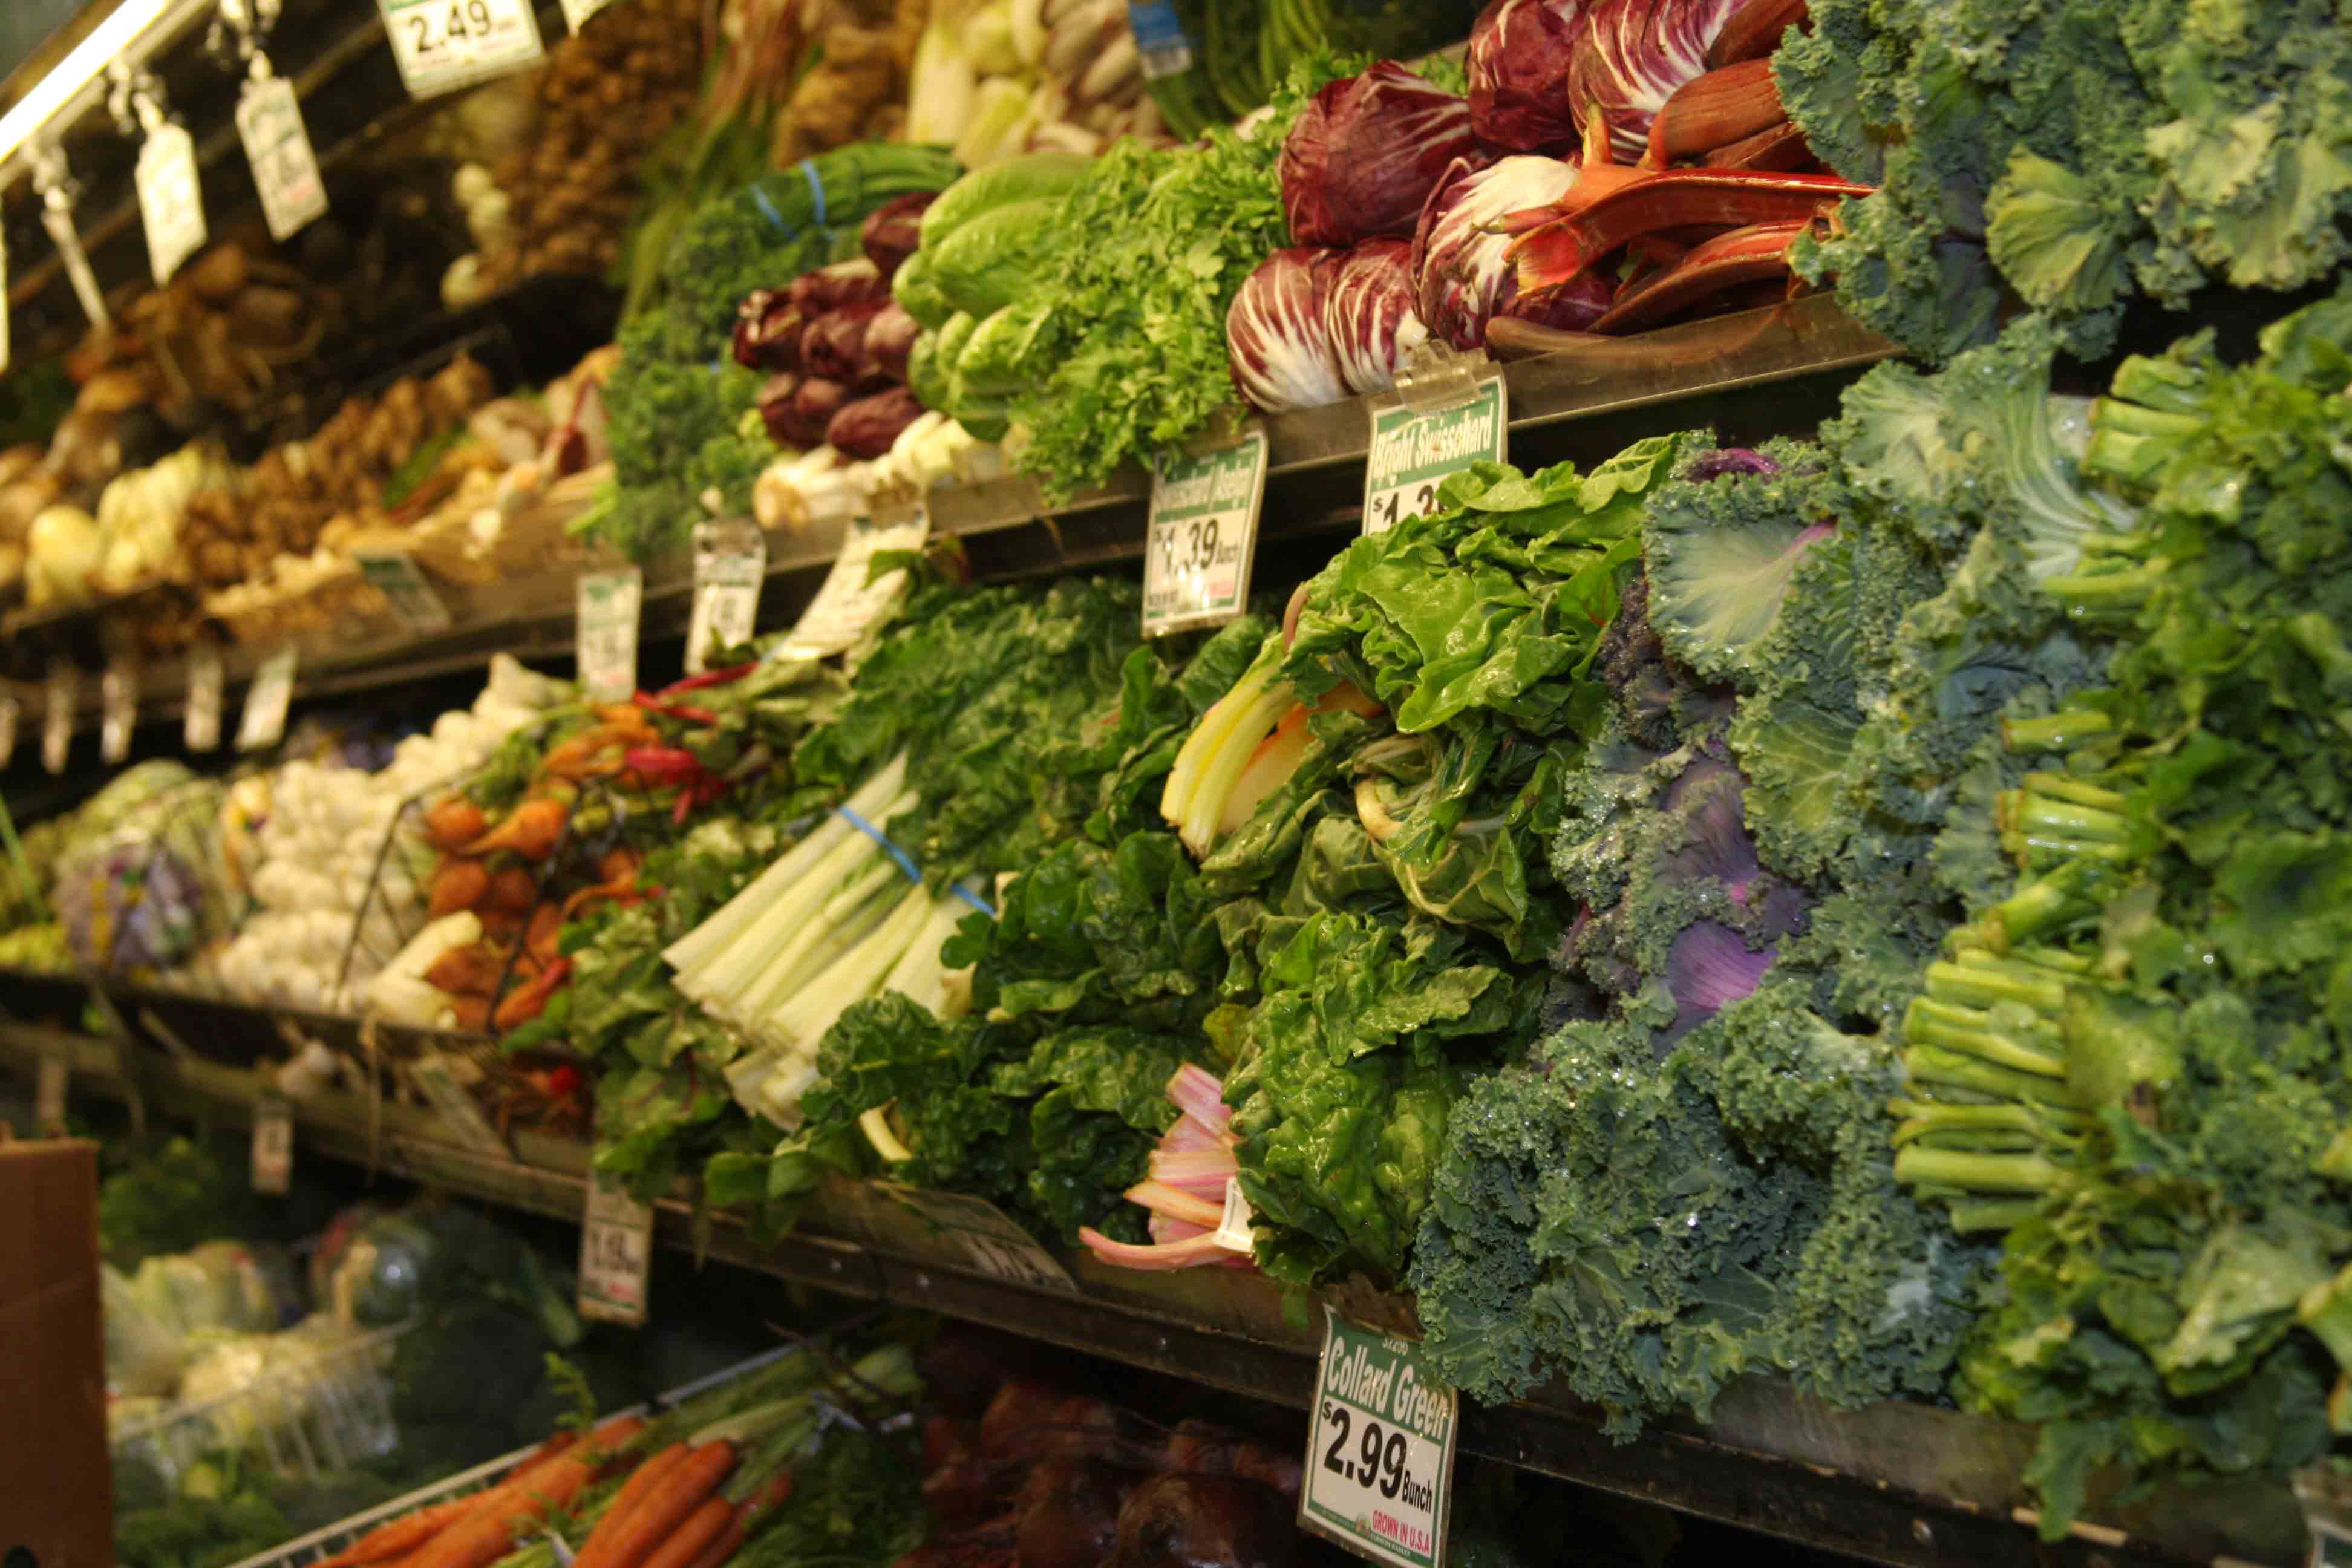 Produce in a grocery store.